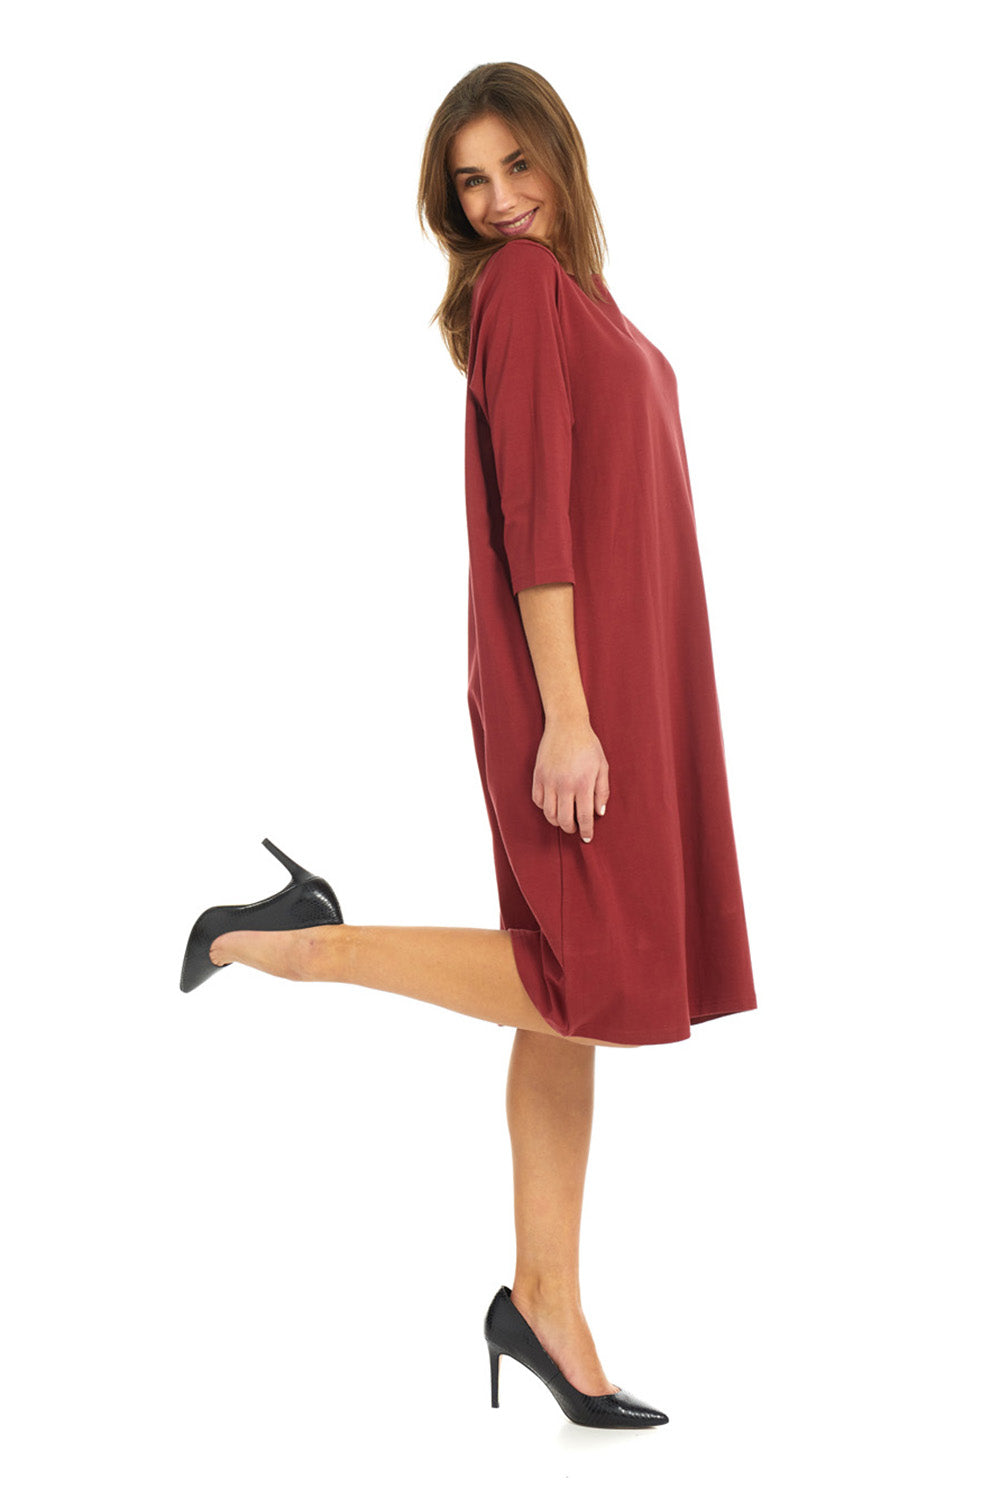 Soft and cozy cotton burgundy t-shirt dress with pockets. modest 3/4 sleeves and knee length